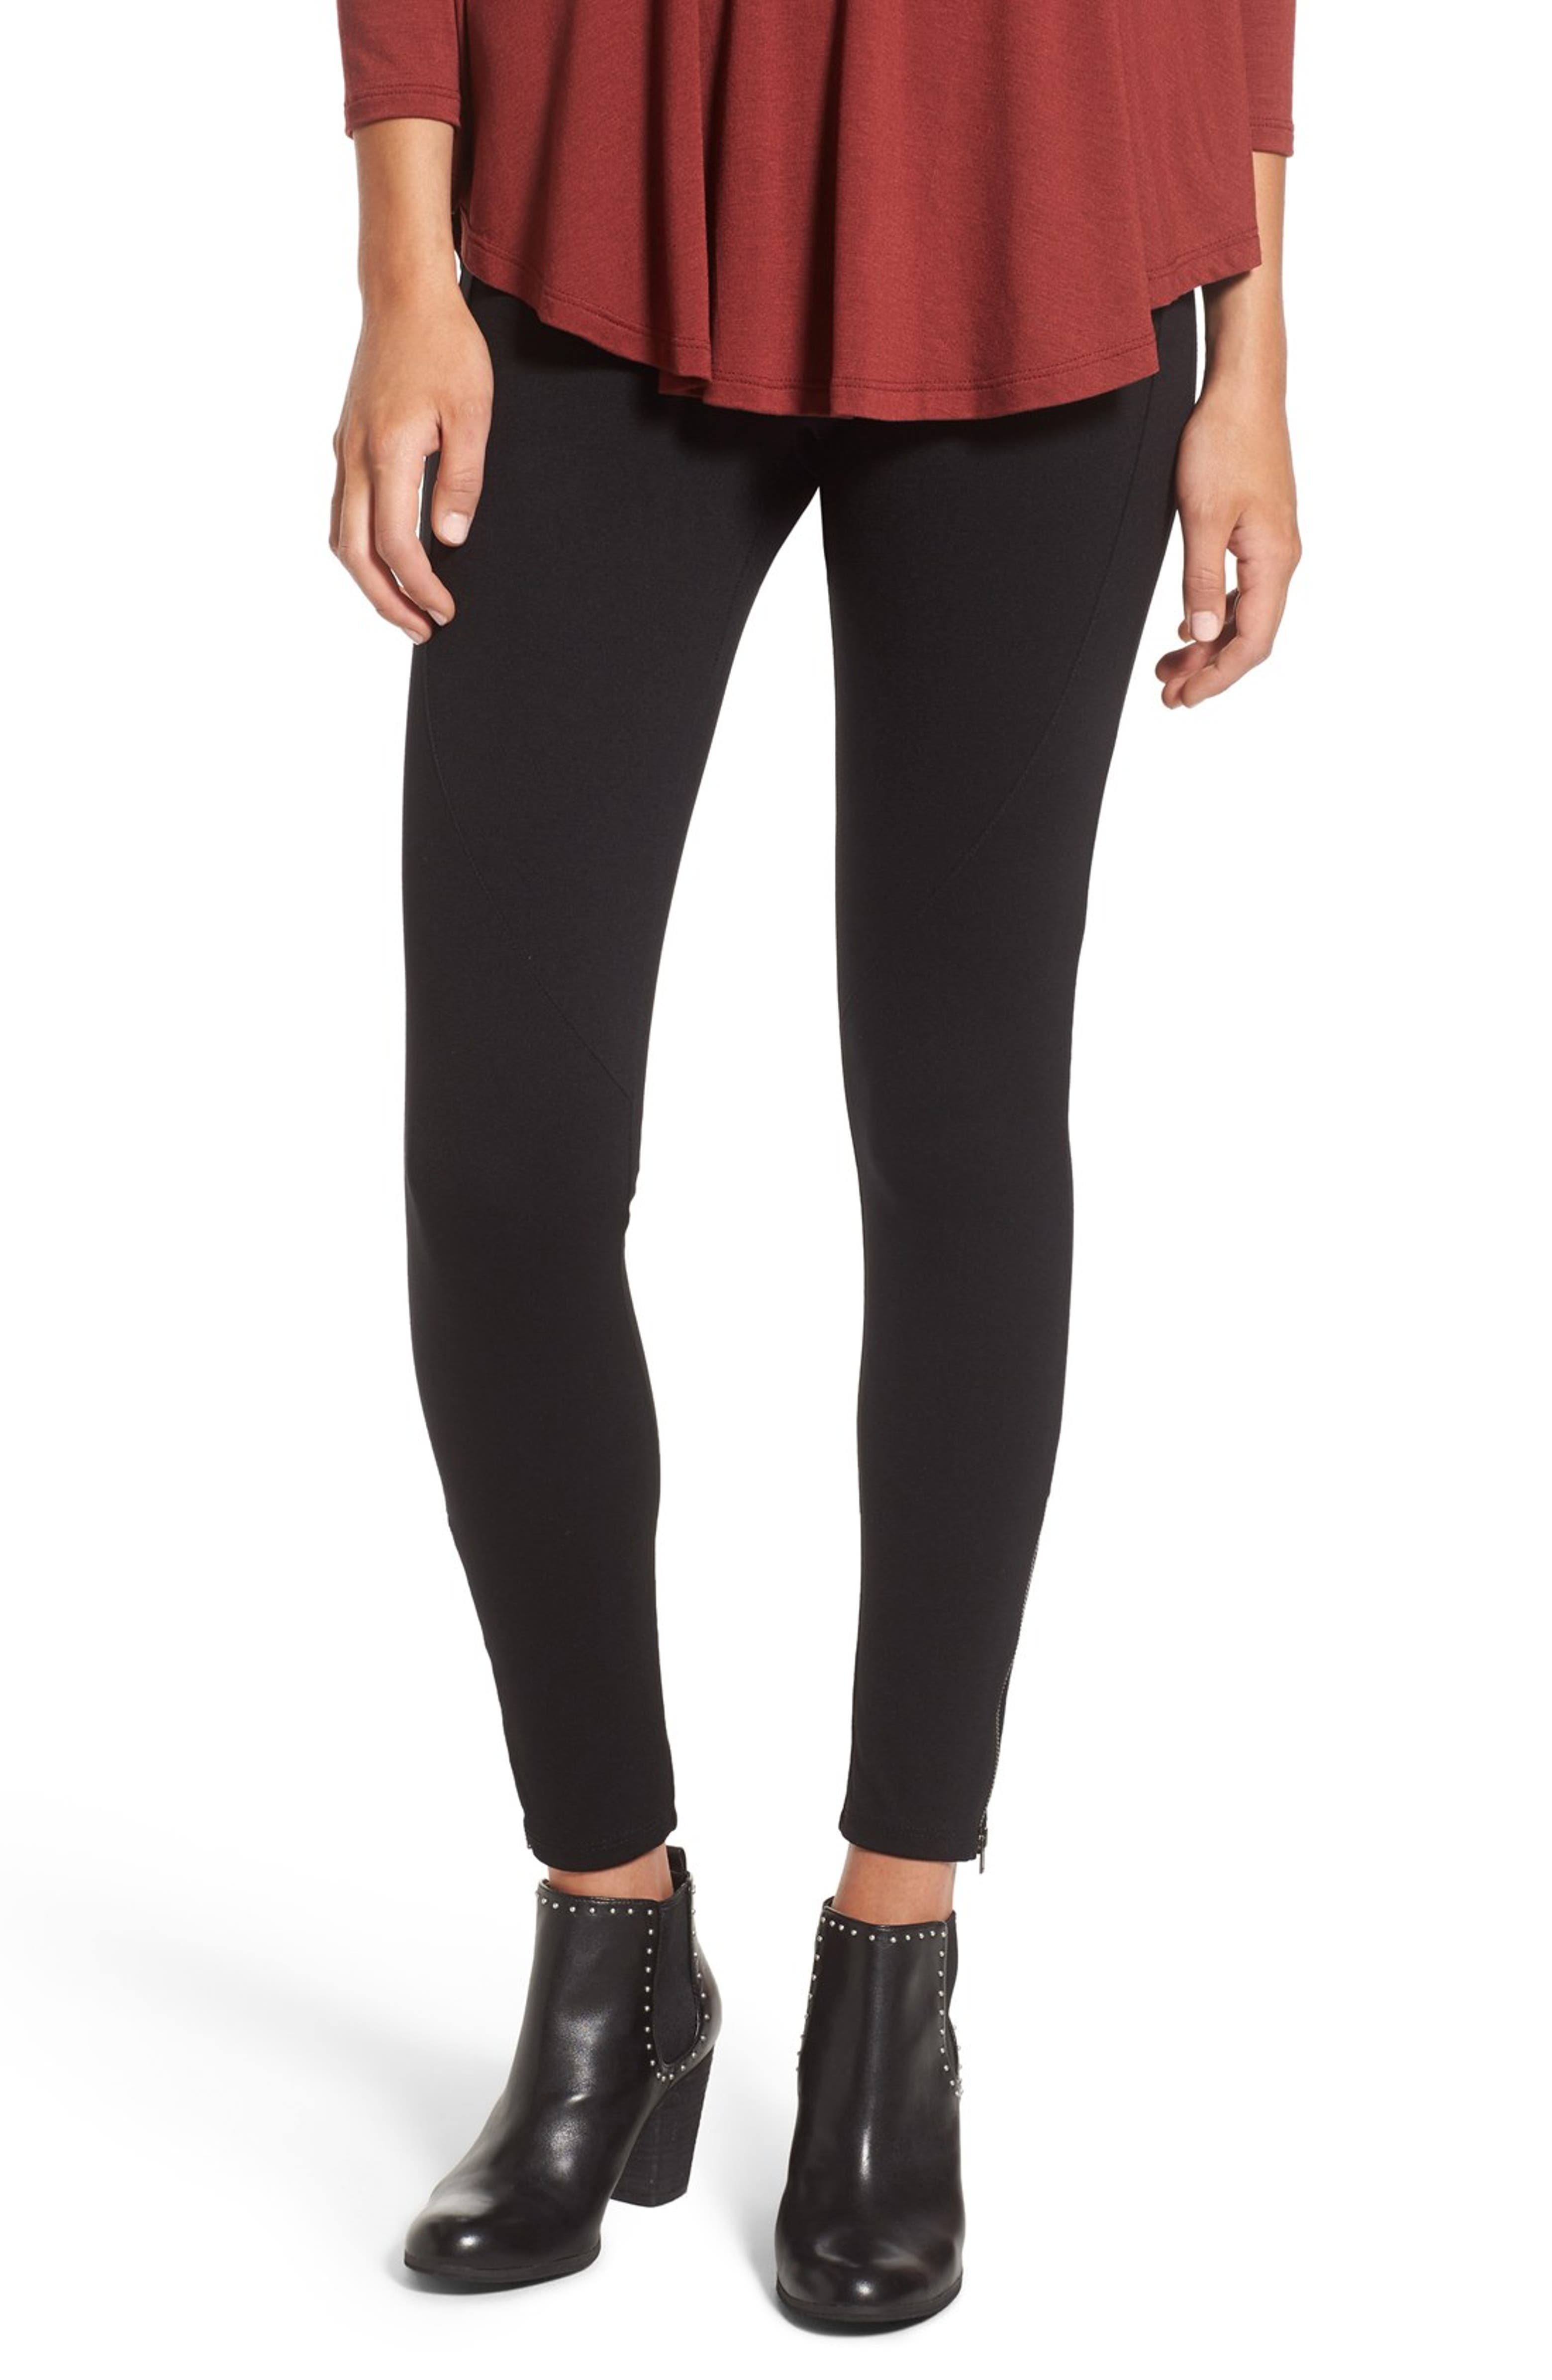 Women's Super Low Rise Leggings with 5 zippers and Faux zipper